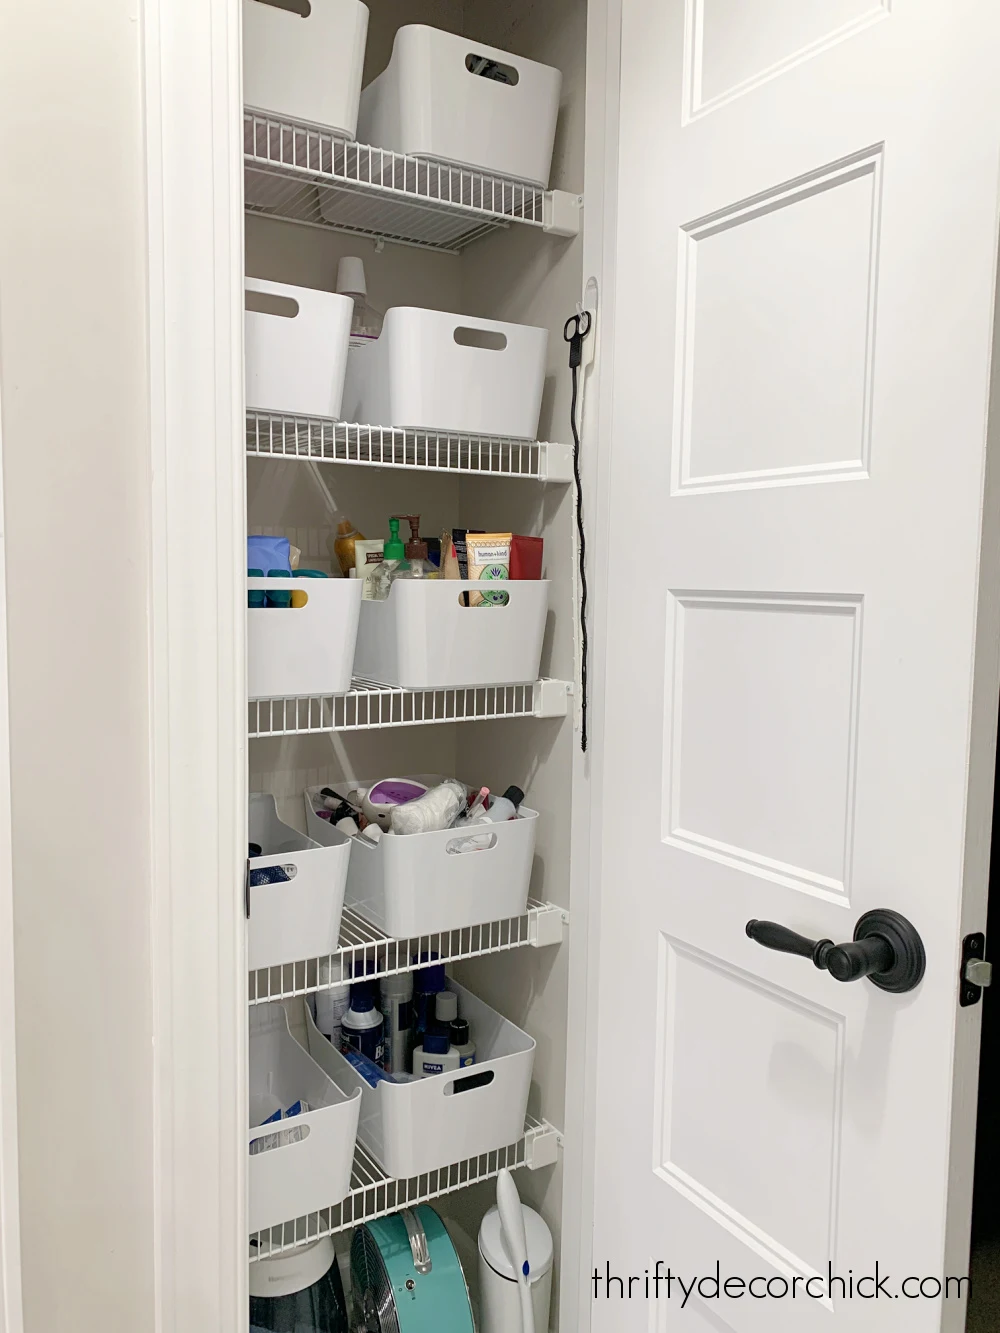 The Perfect Under the Sink Organization Solution, Thrifty Decor Chick